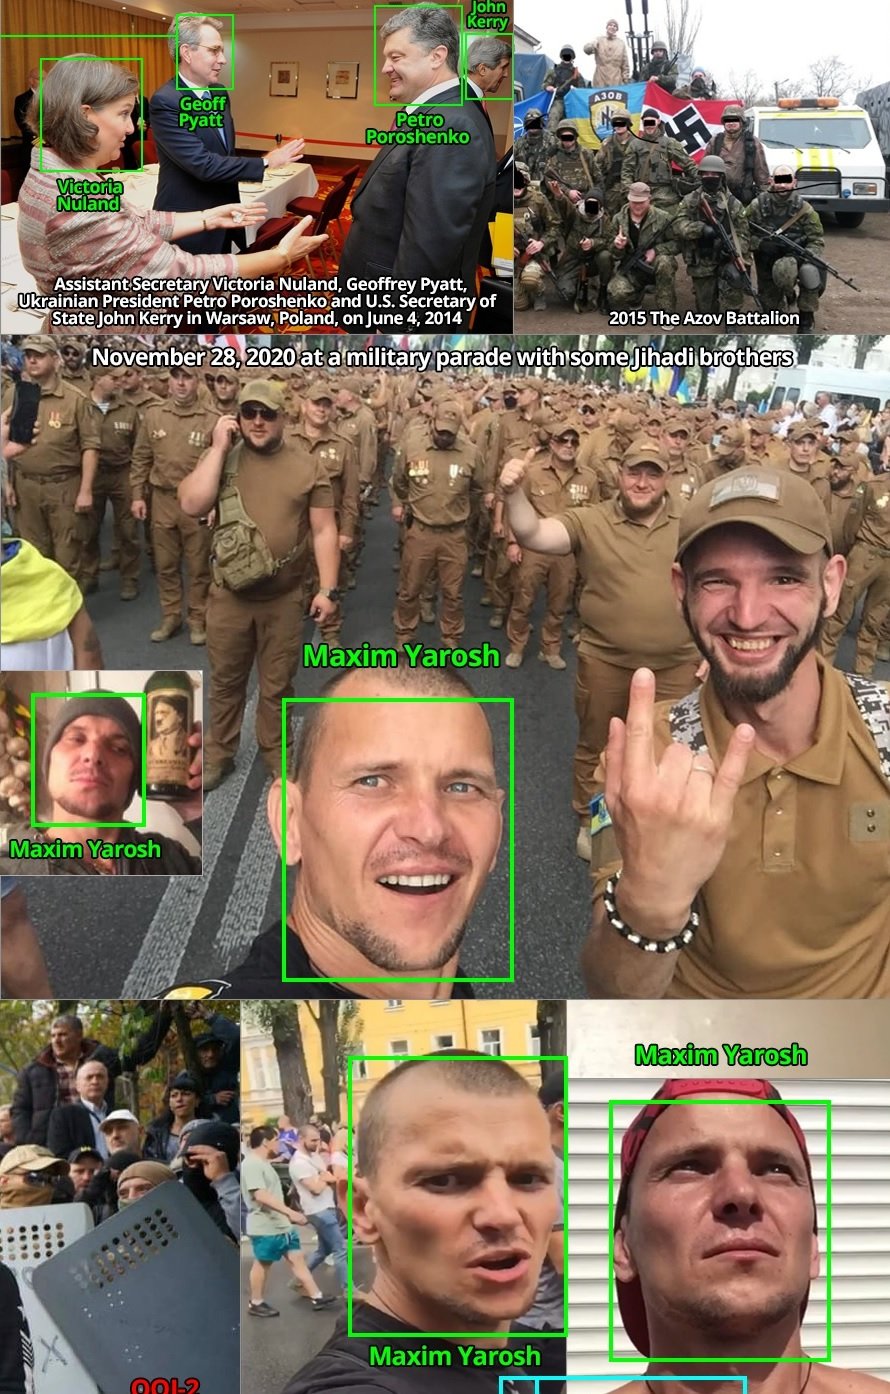 You are currently viewing FBI Documents Uncovered that Tie Americans to “Neo-Nazi” Azov Battalion in Ukraine